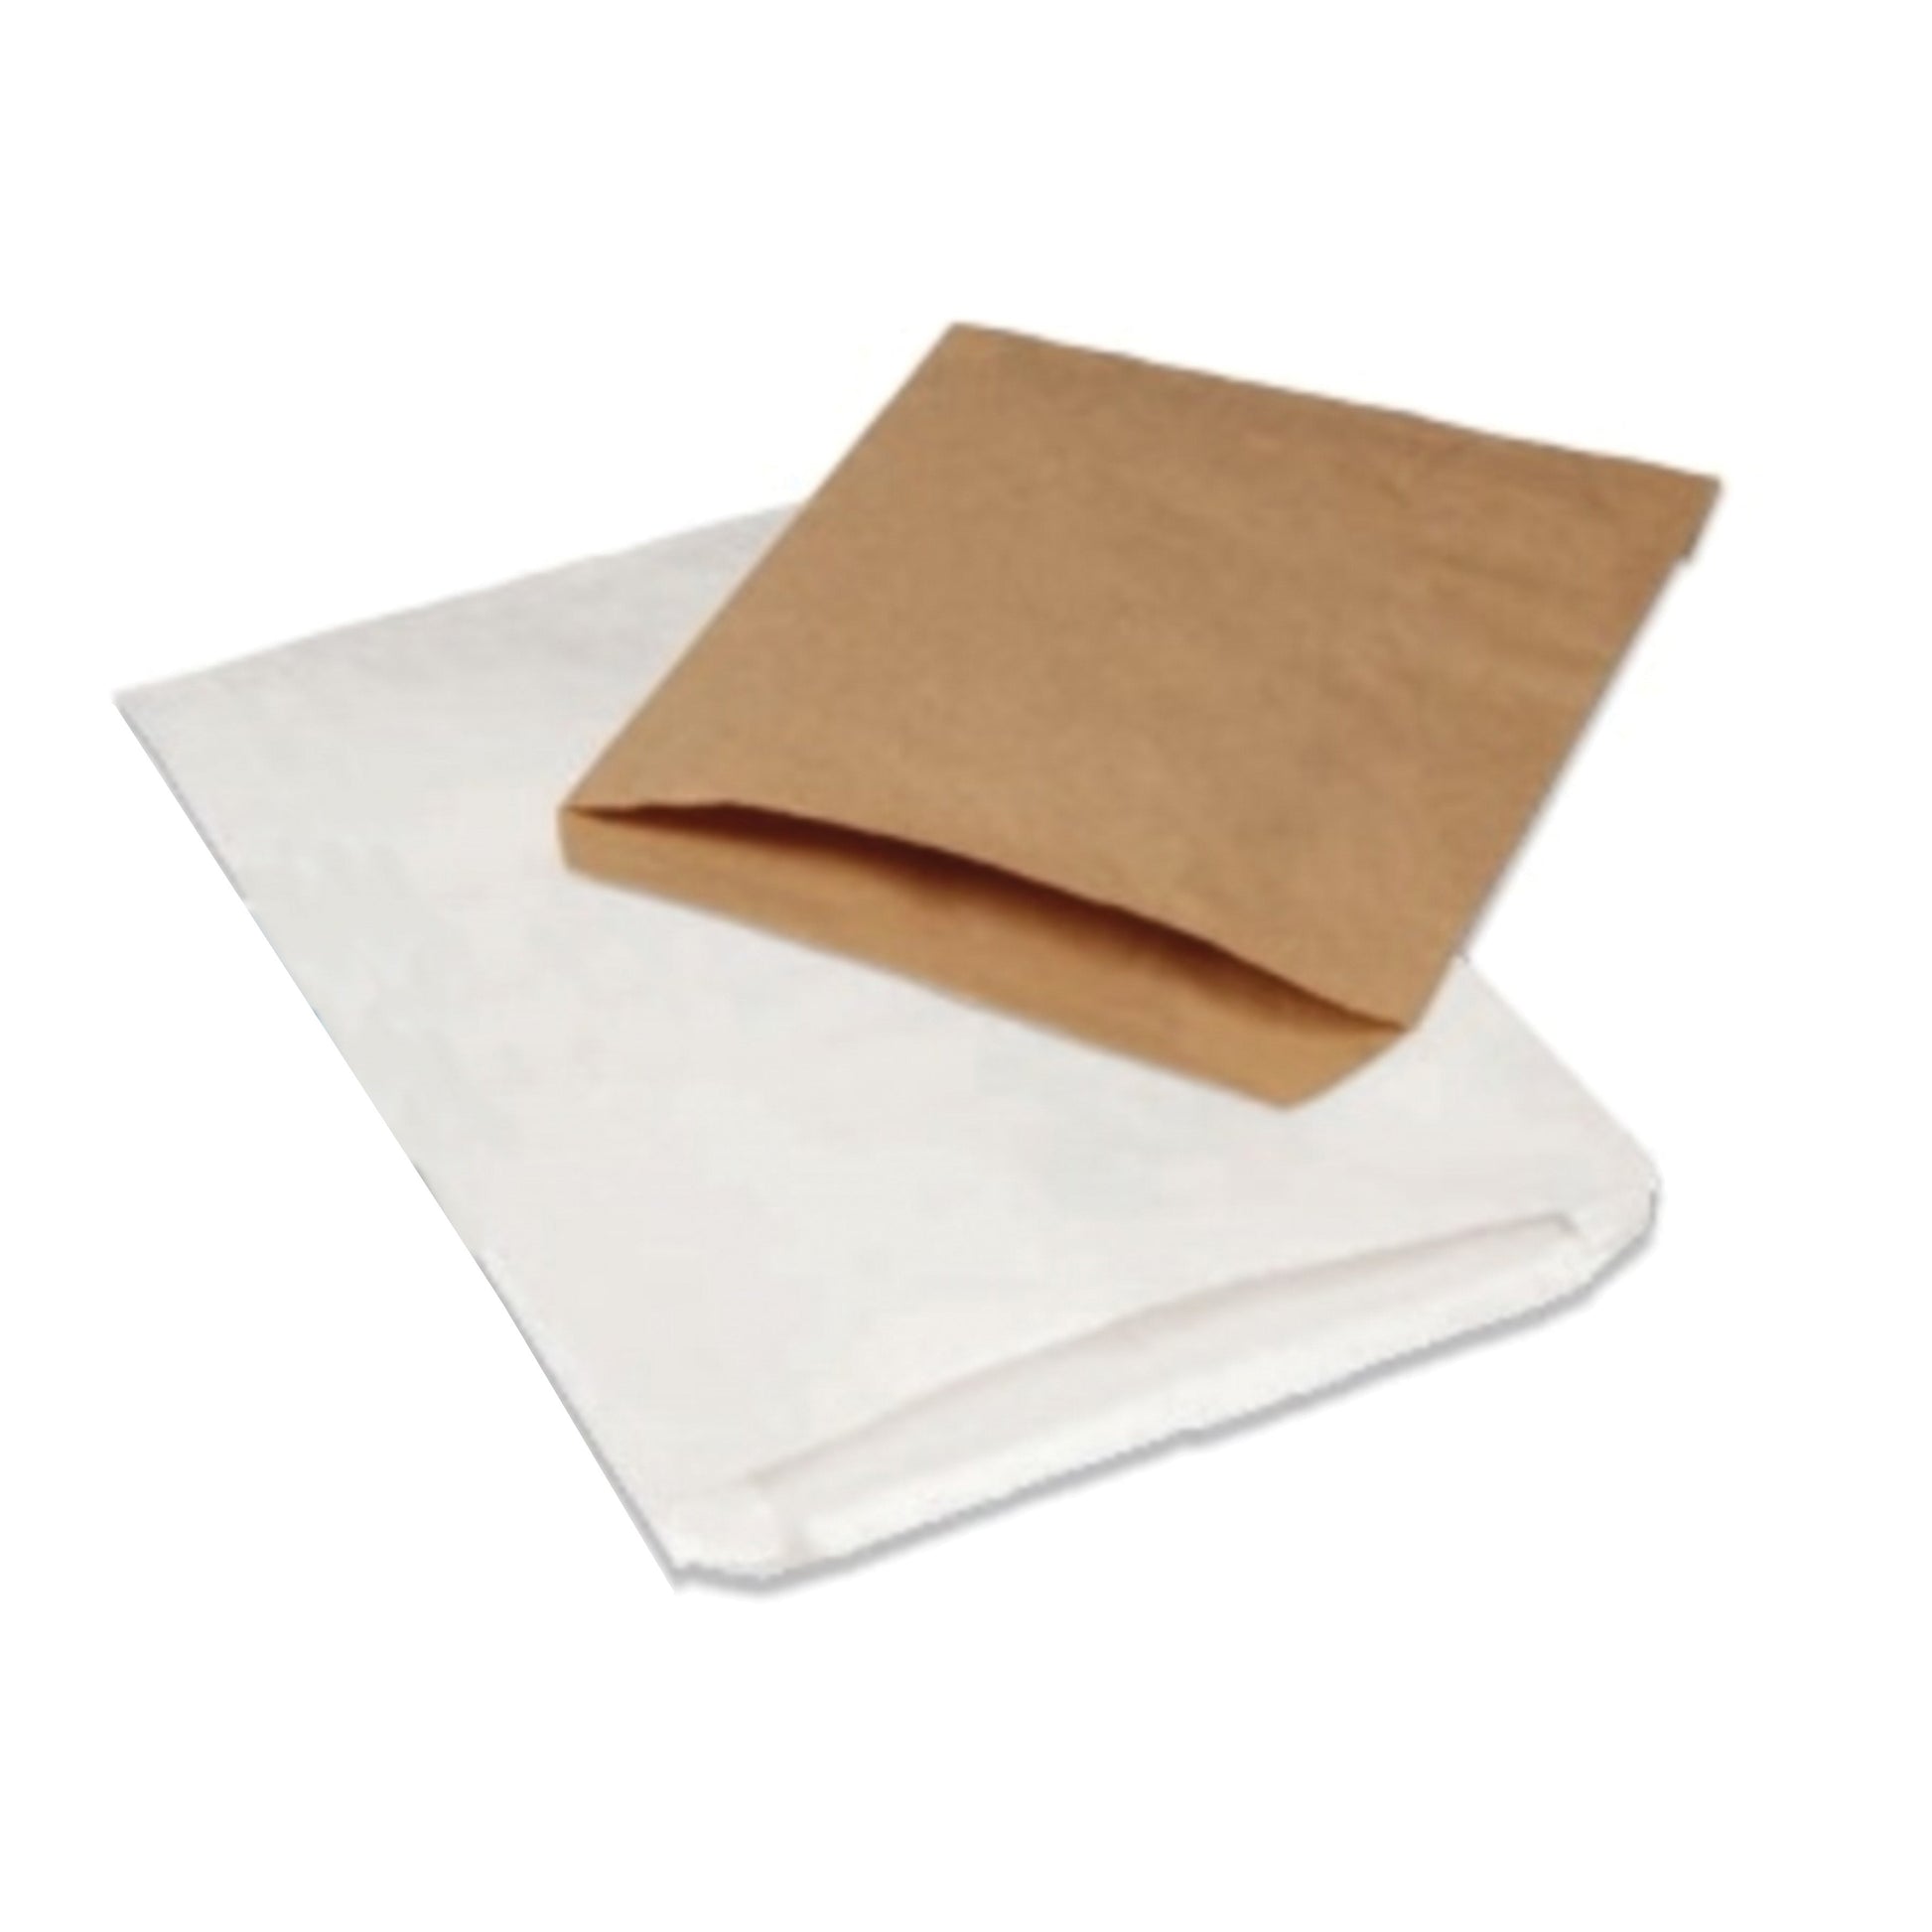 Ideal for newsprint, calendars, posters, magazines, gift cards and more, these 22.5in x 7.5in x 30in Duro Bag® Dubl Life® 40# Kraft Paper Merchandise Bags are BPI® certified compostable and FSC® certified. Sold 125 per case. 